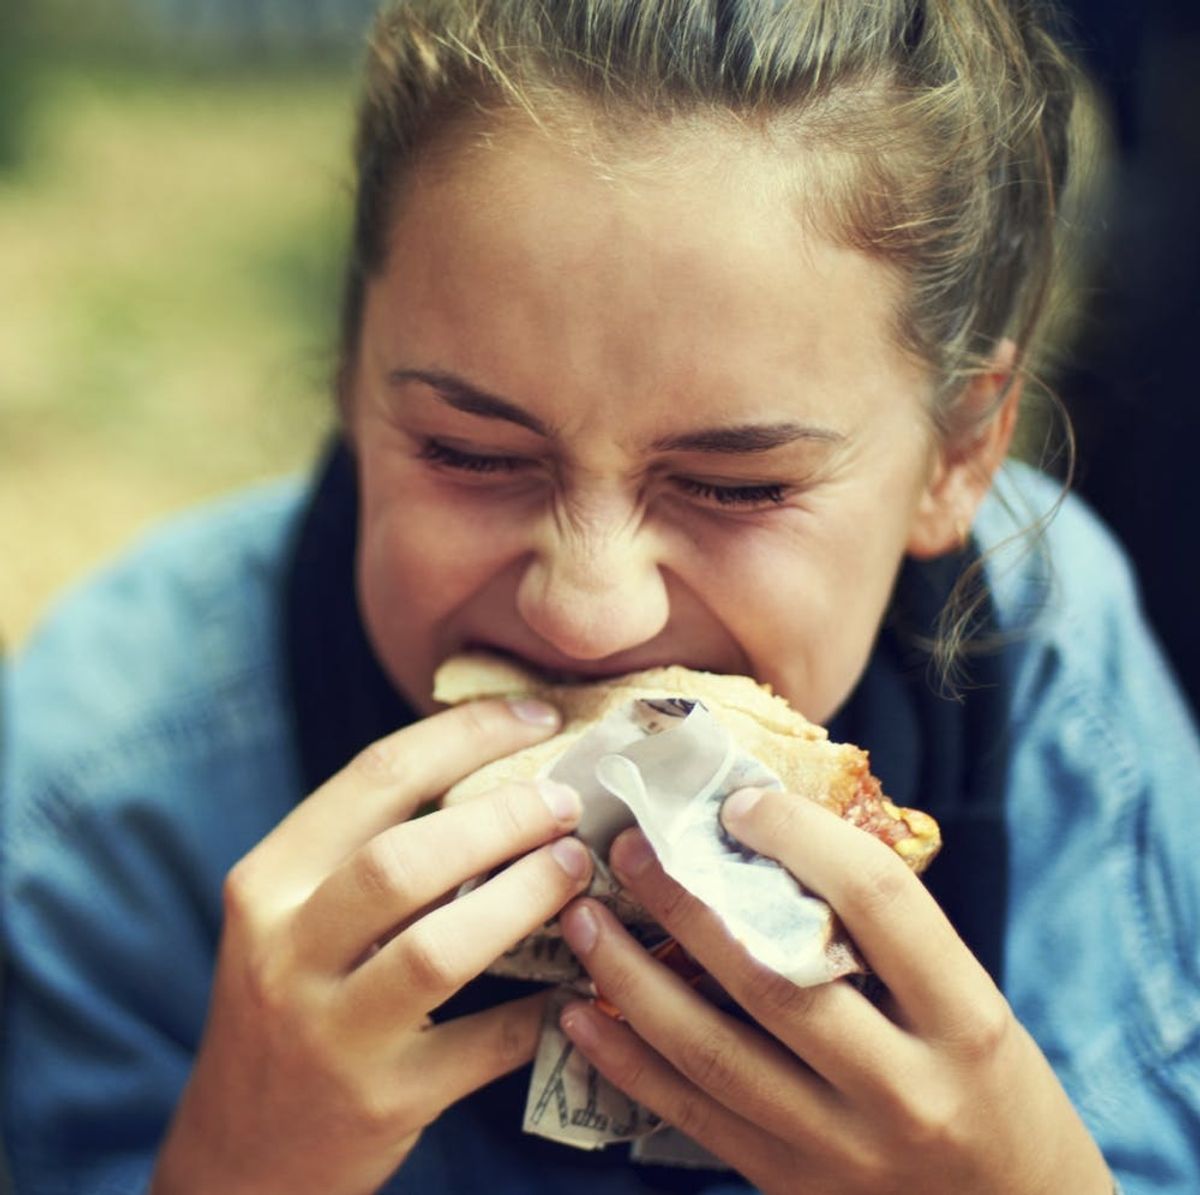 Fast Food Employees’ Insider Facts May Have You Reconsidering Lunch